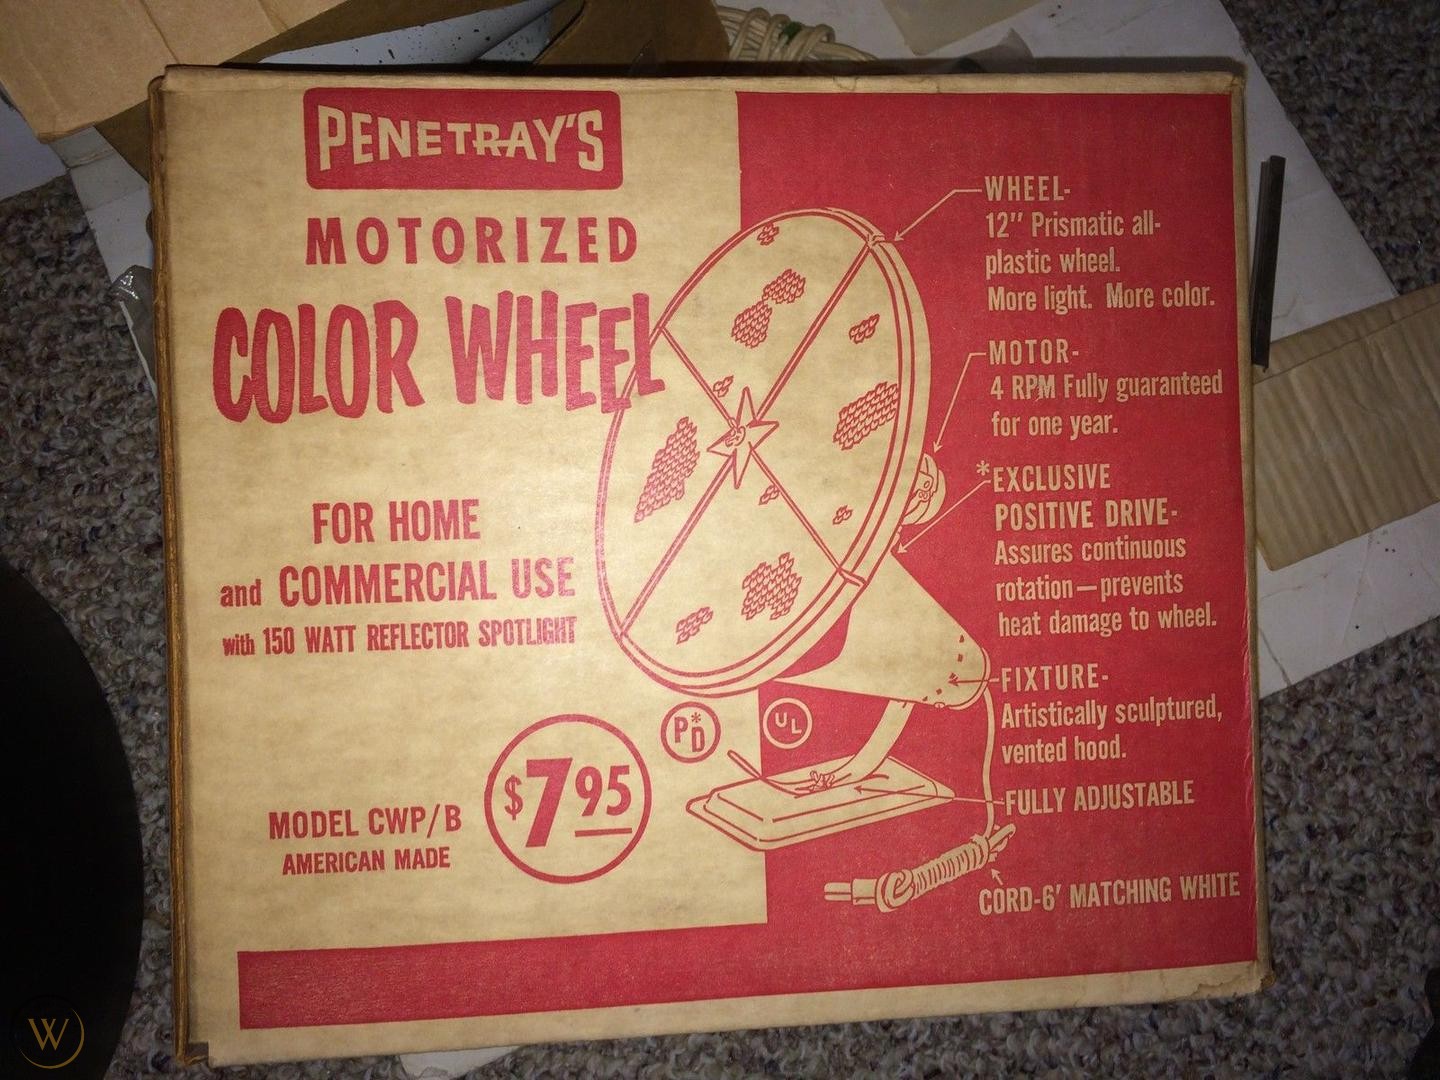 poster - An Penetray'S Motorized Color Wheel M Wheel 12" Prismatic all plastic wheel. More light. More color. Motor 4 Rpm Fully guaranteed for one year. Exclusive Positive Drive Assures continuous rotation prevents heat damage to wheel. Fixture Artistical